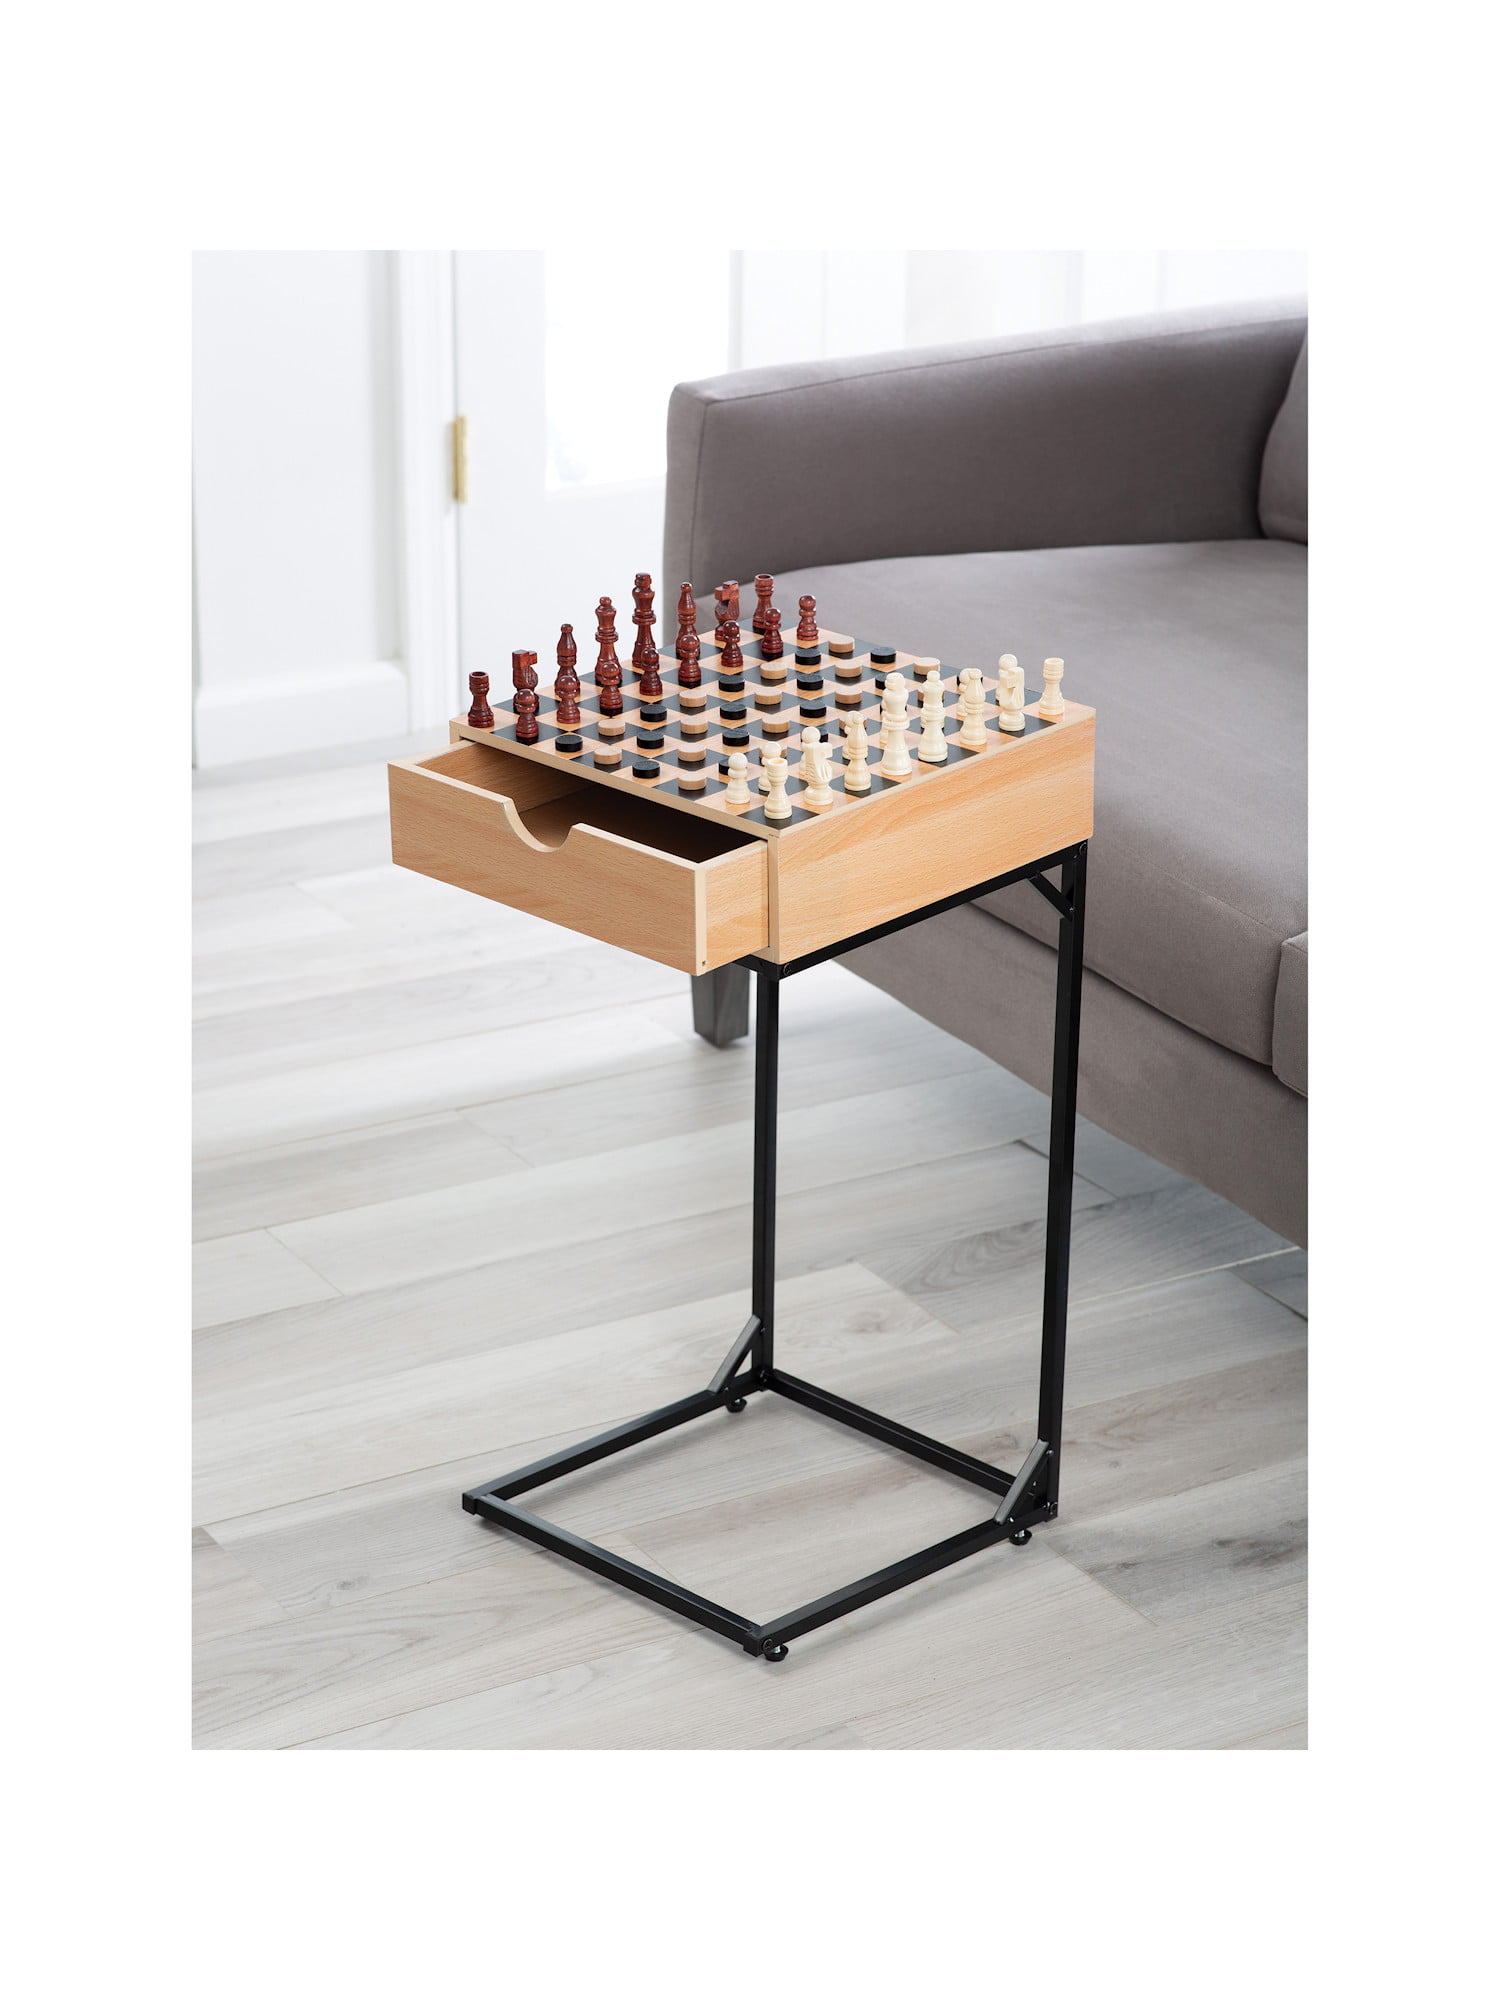 Octagonal Wooden Chess and Checkers Set with Storage Drawers Indoor Board Game 